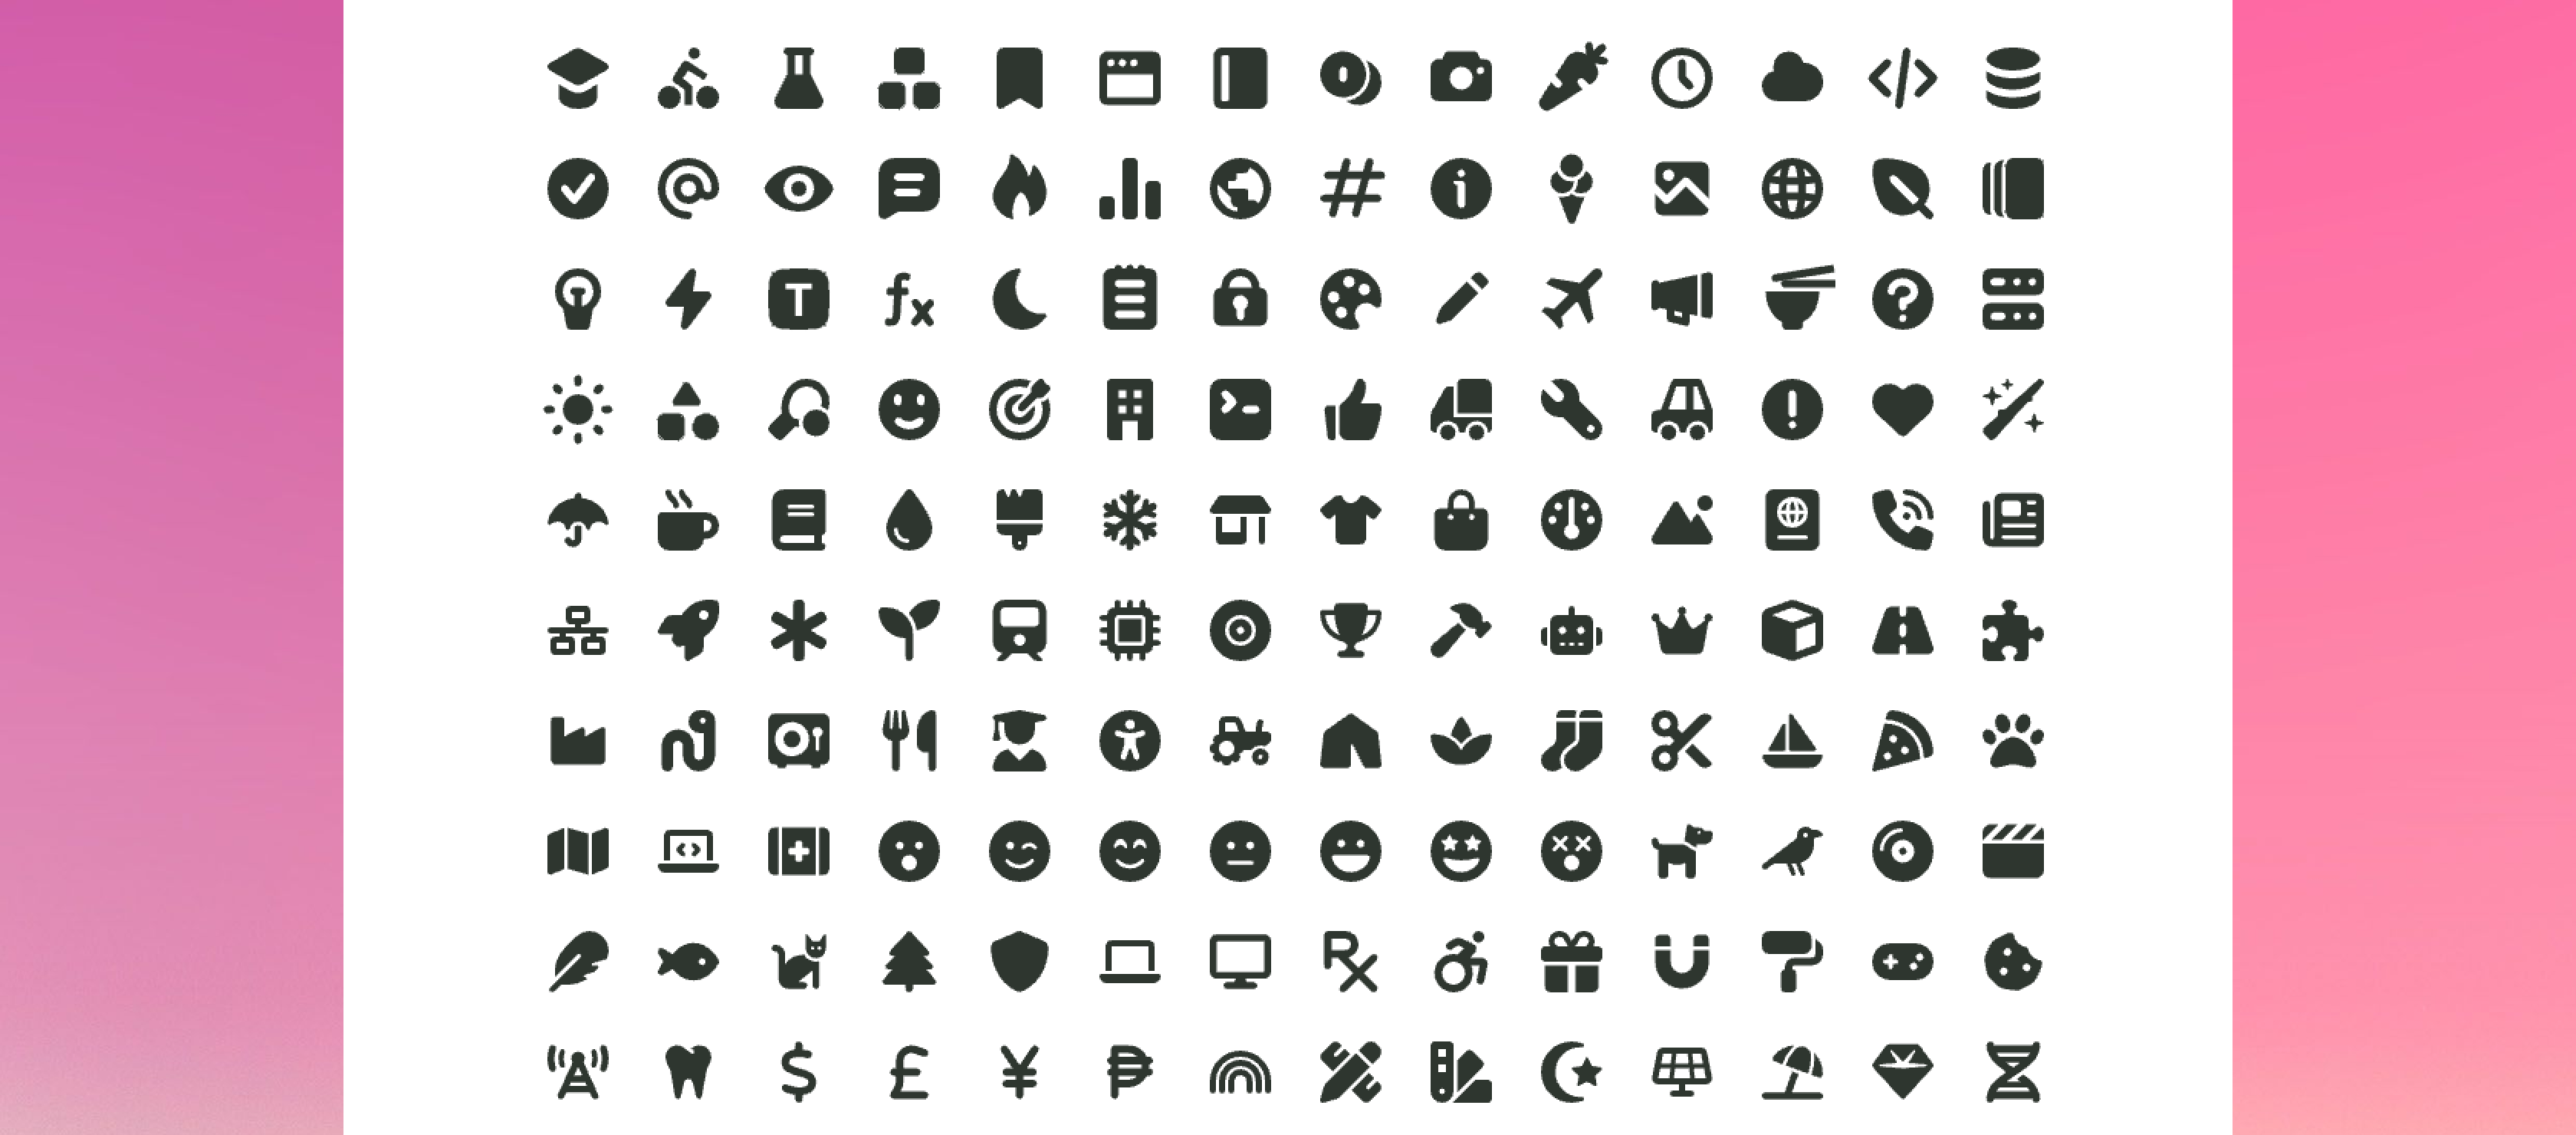 New collection icons